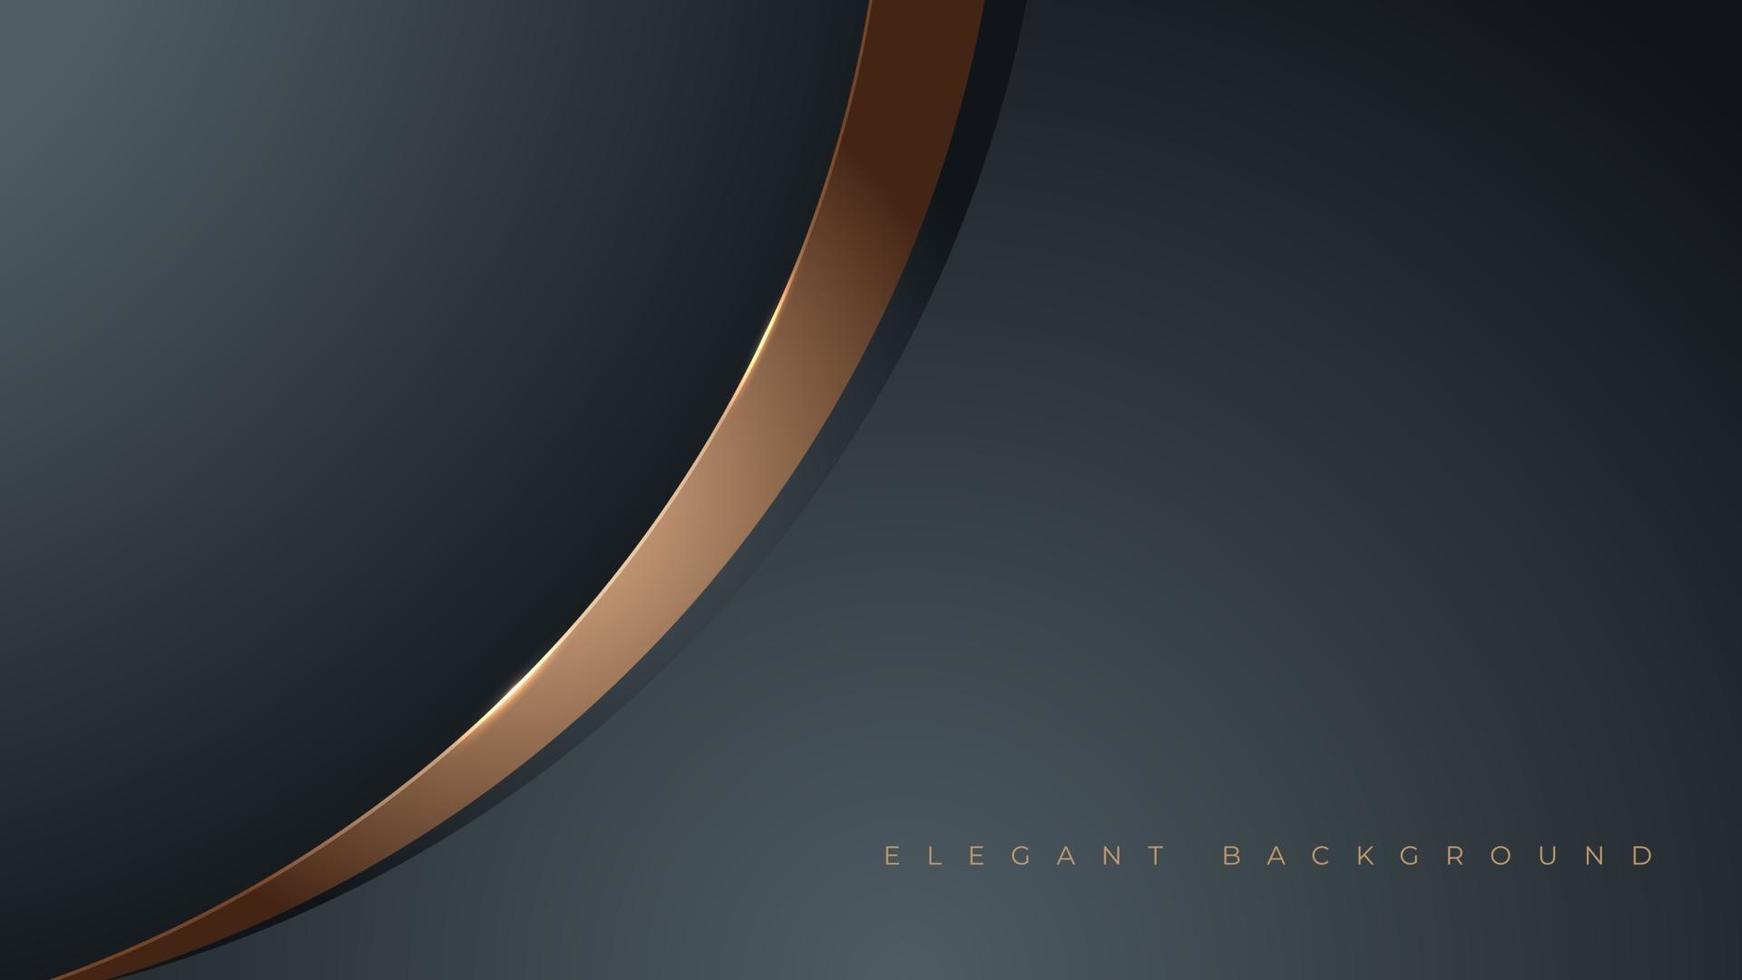 Abstract elegant background with curve shape. Business digital product template banner with golden line. Vector illustration print template.